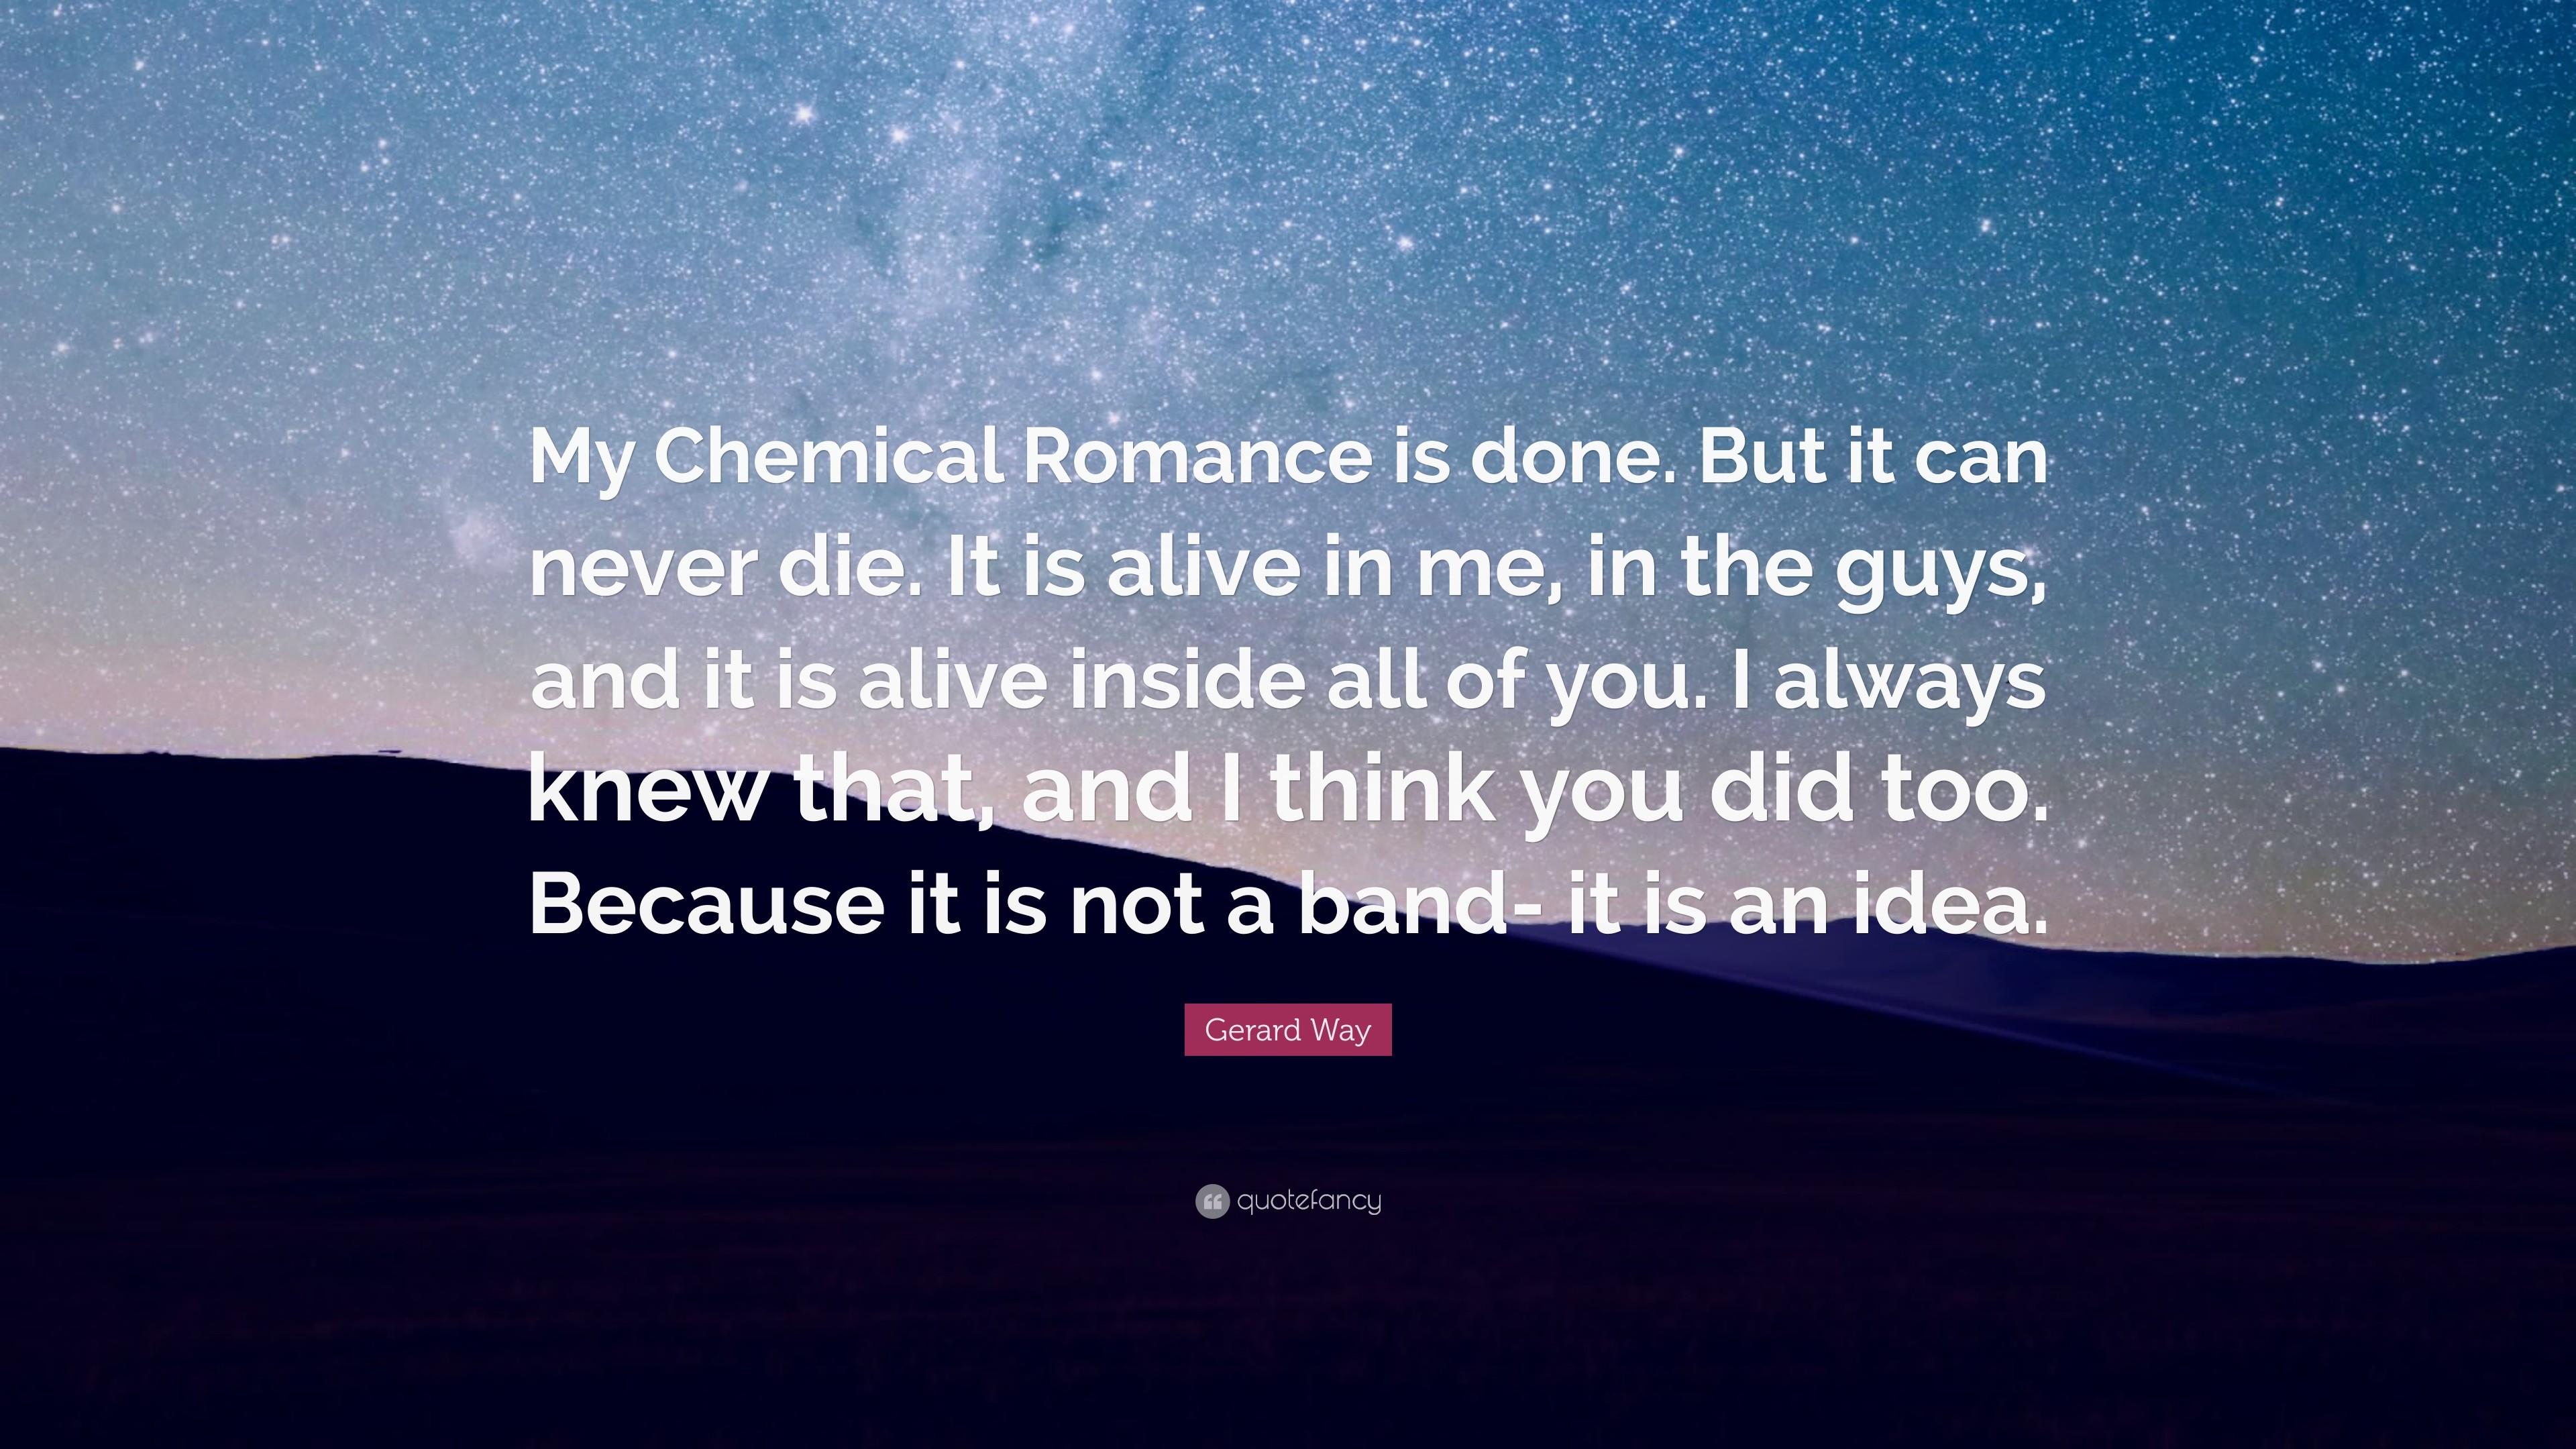 3840x2160 Gerard Way Quote: “My Chemical Romance is done. But it can never die